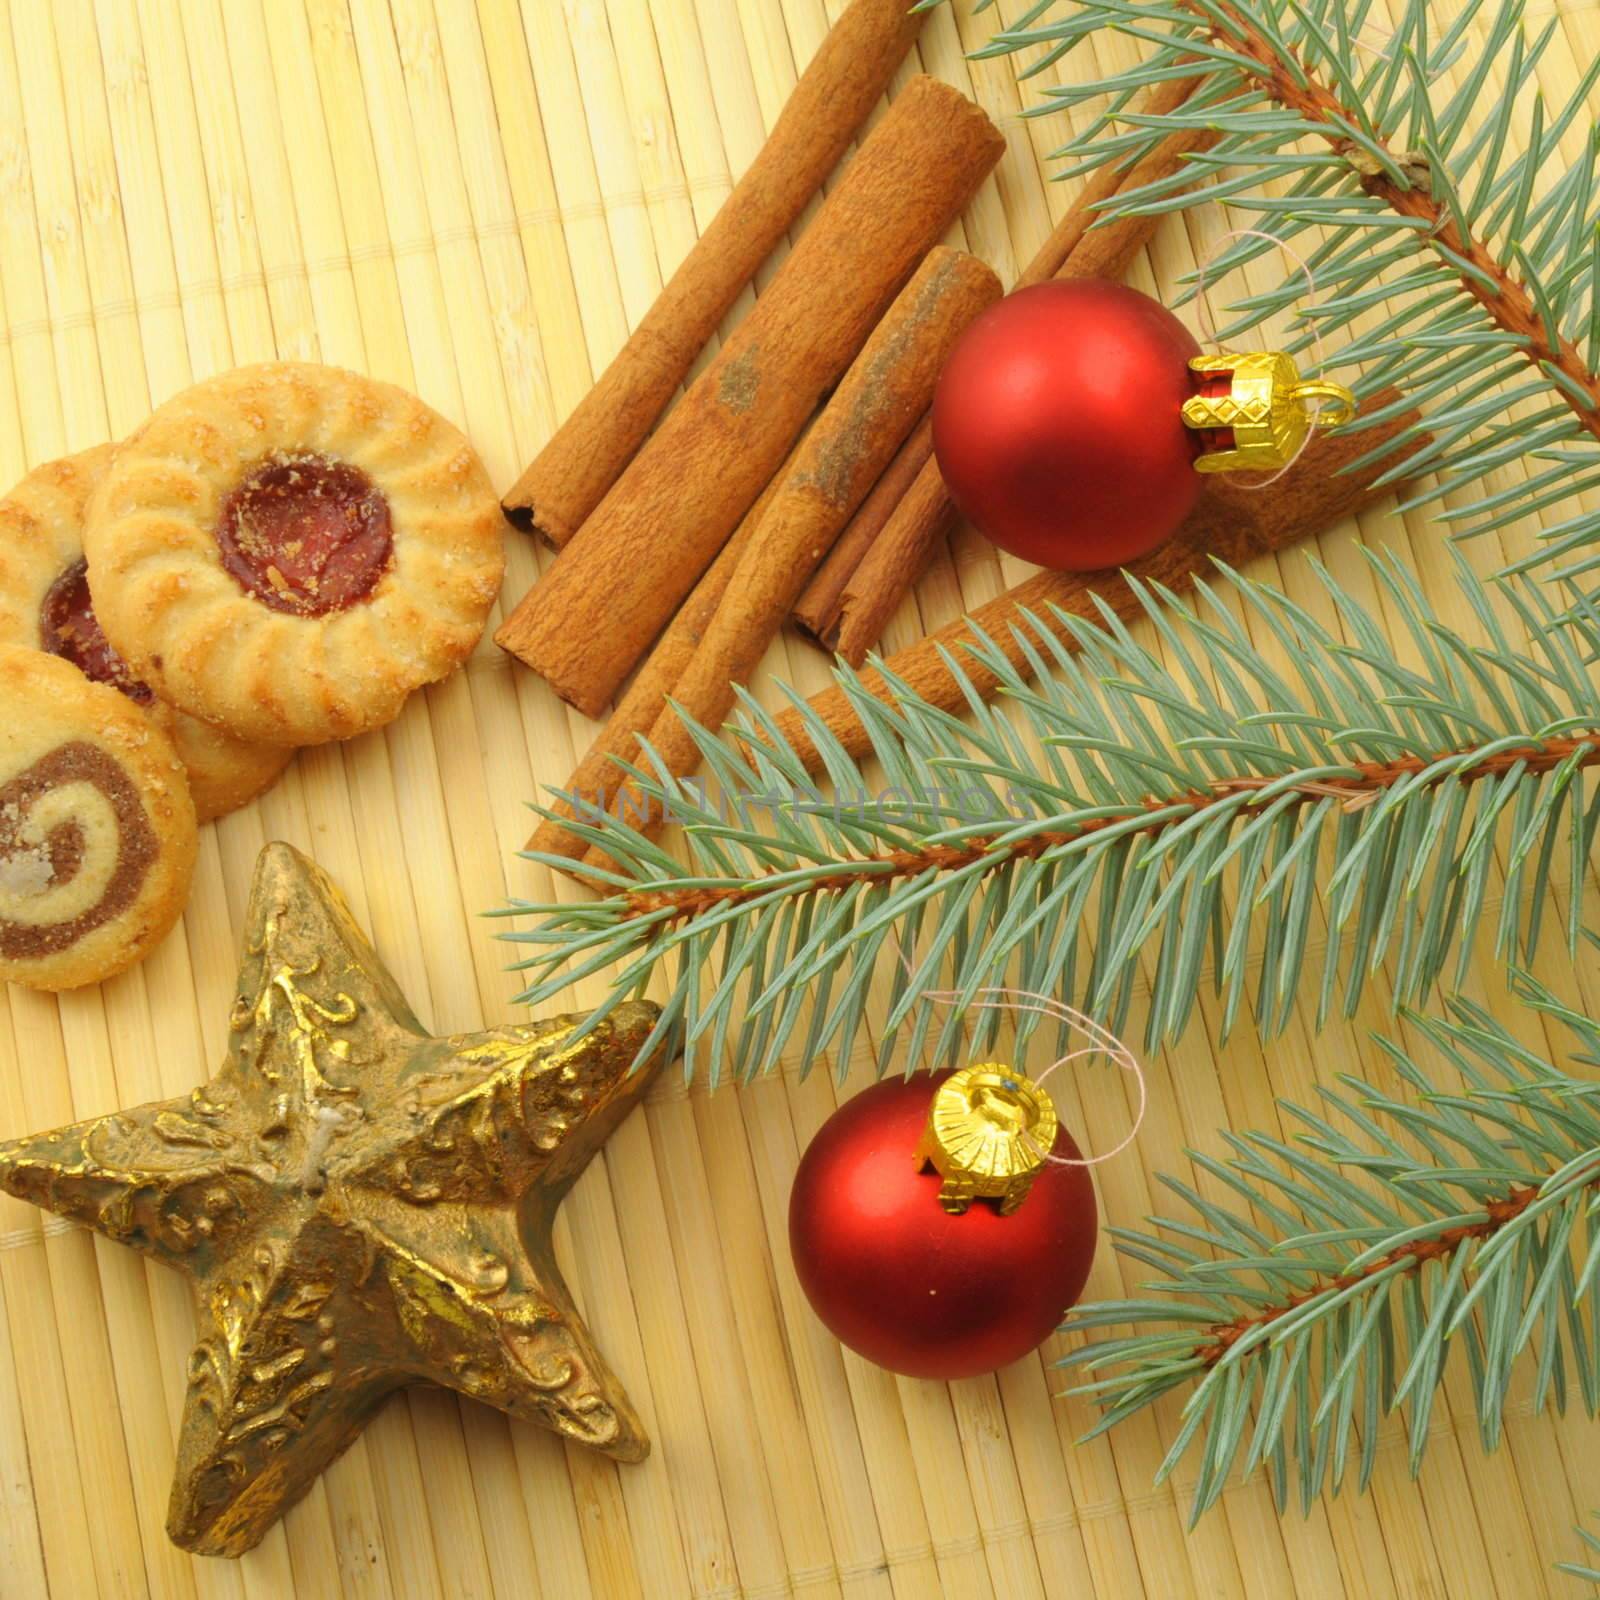 xmas or christmas still life with cookies